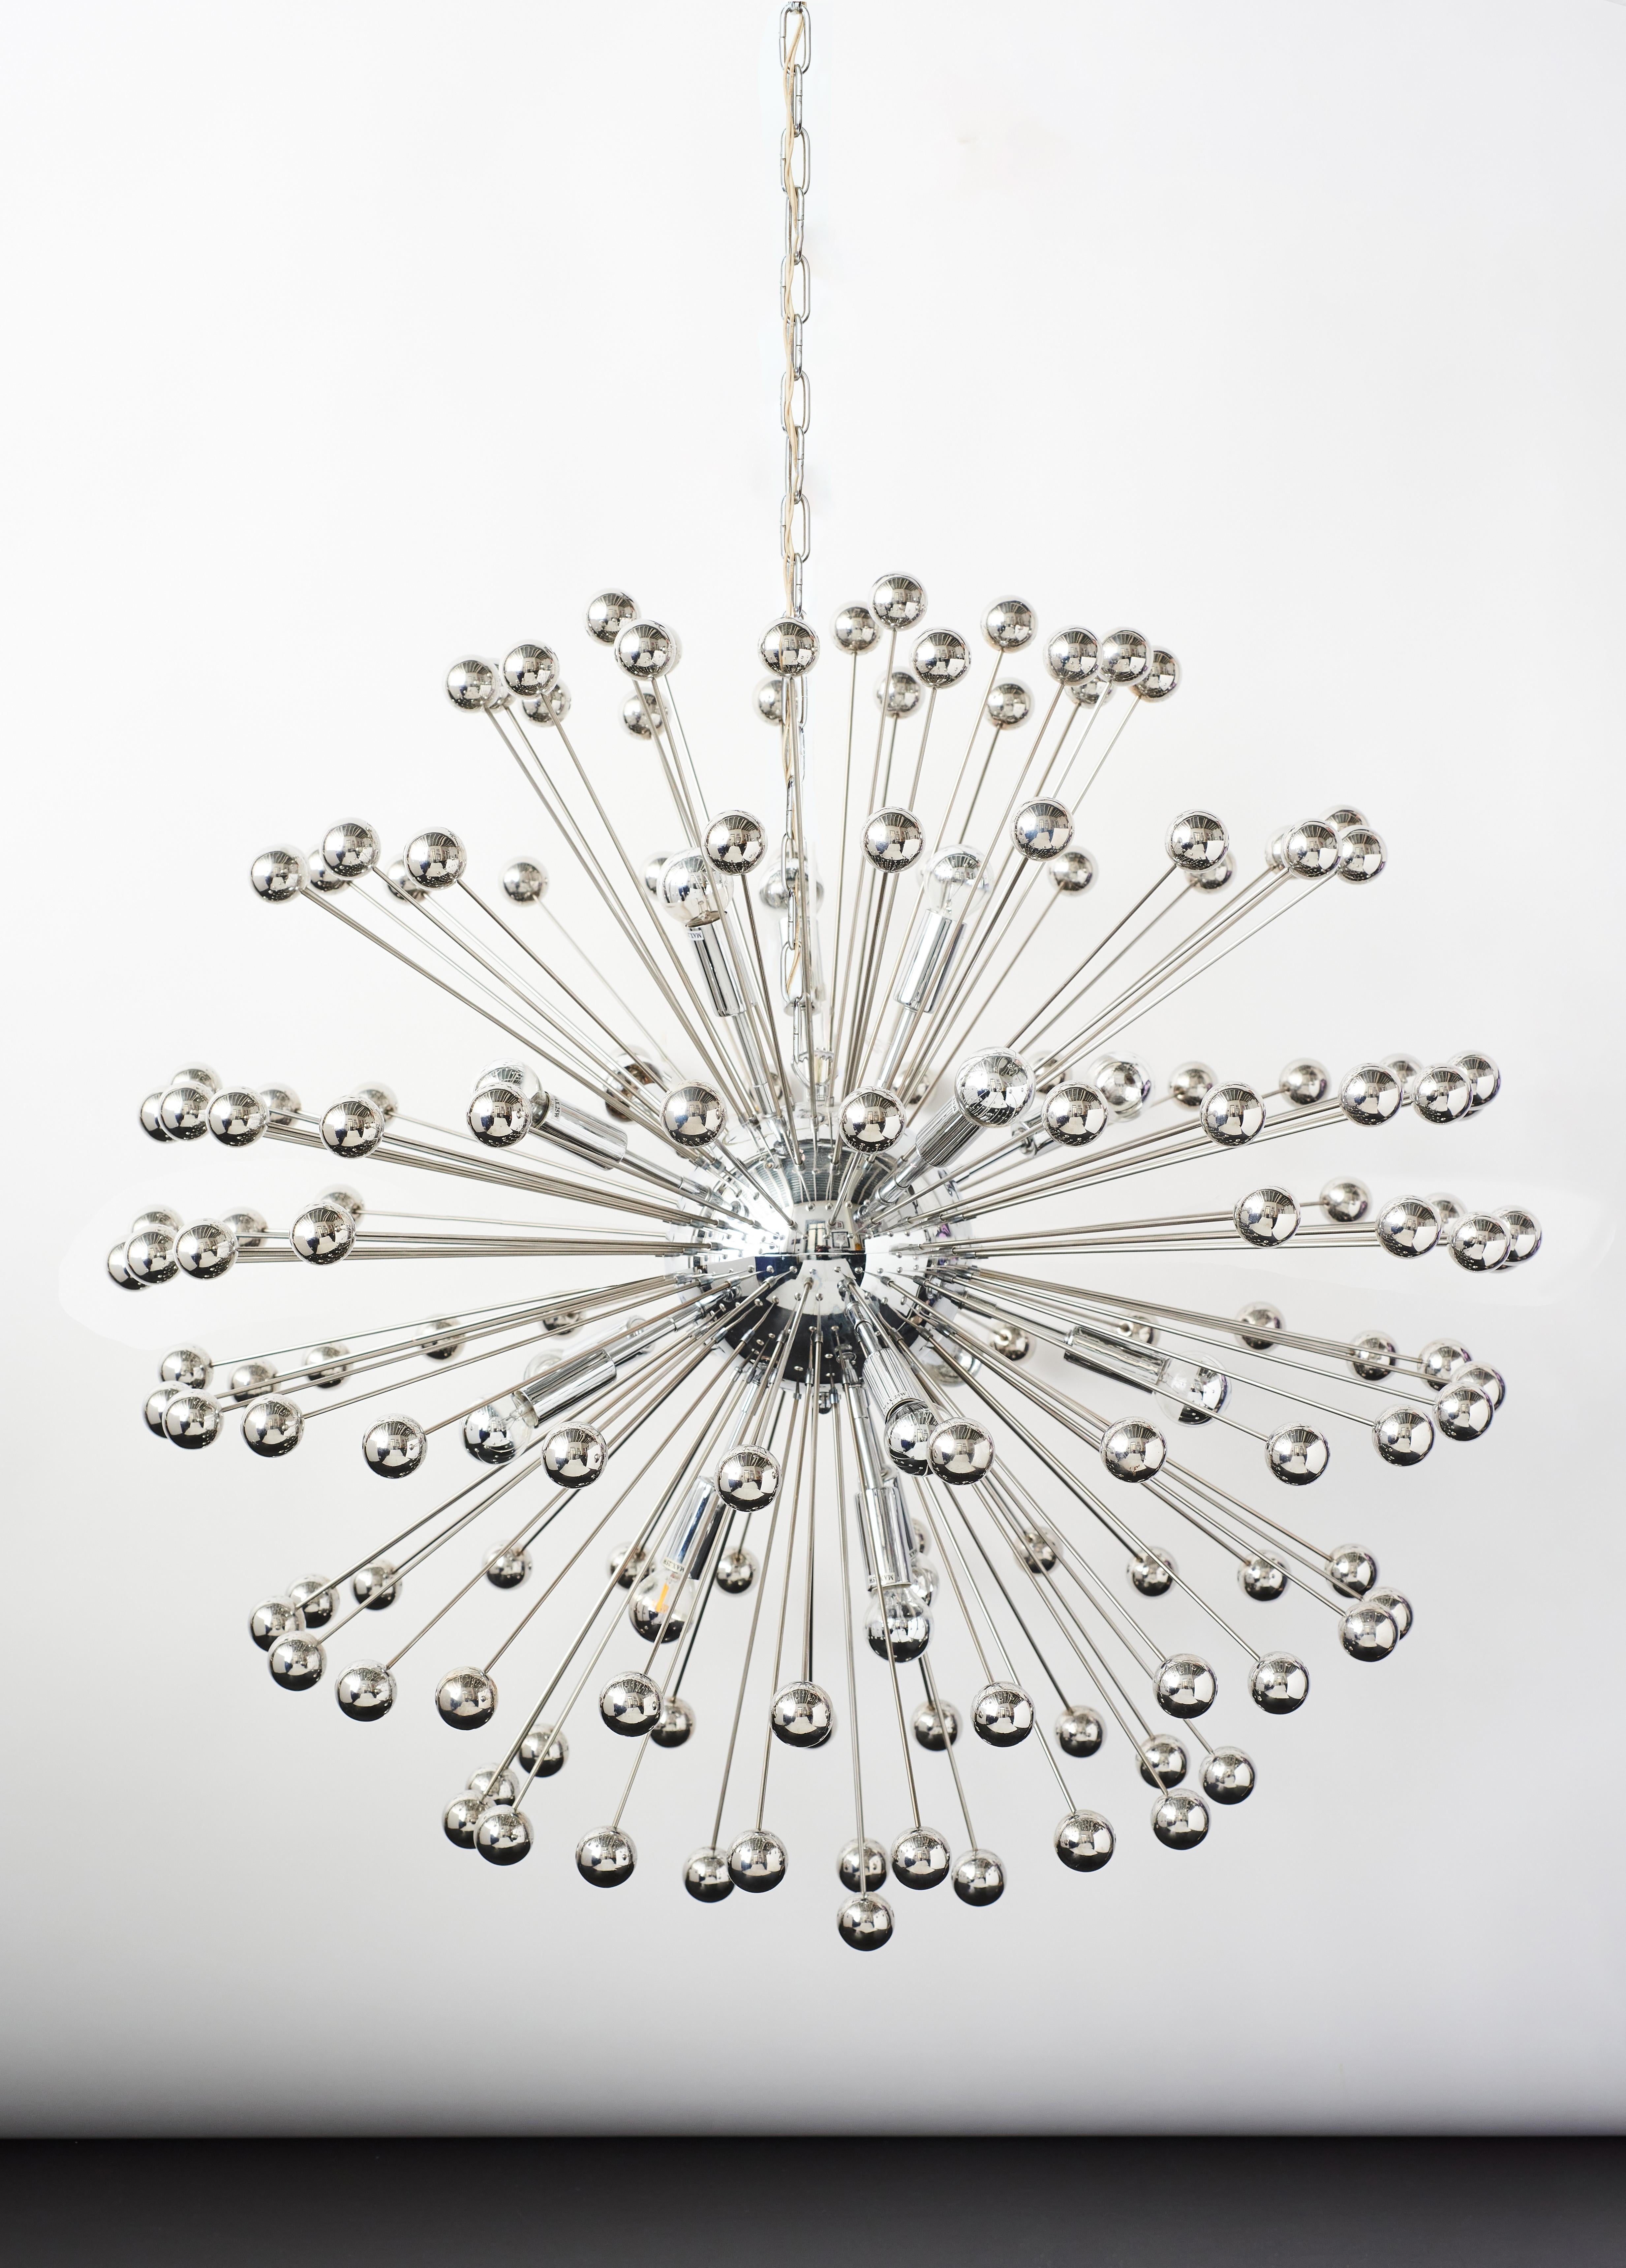 Midcentury Sputnik chandelier with 90cm diameter and 15 light bulbs.
Very good condition.